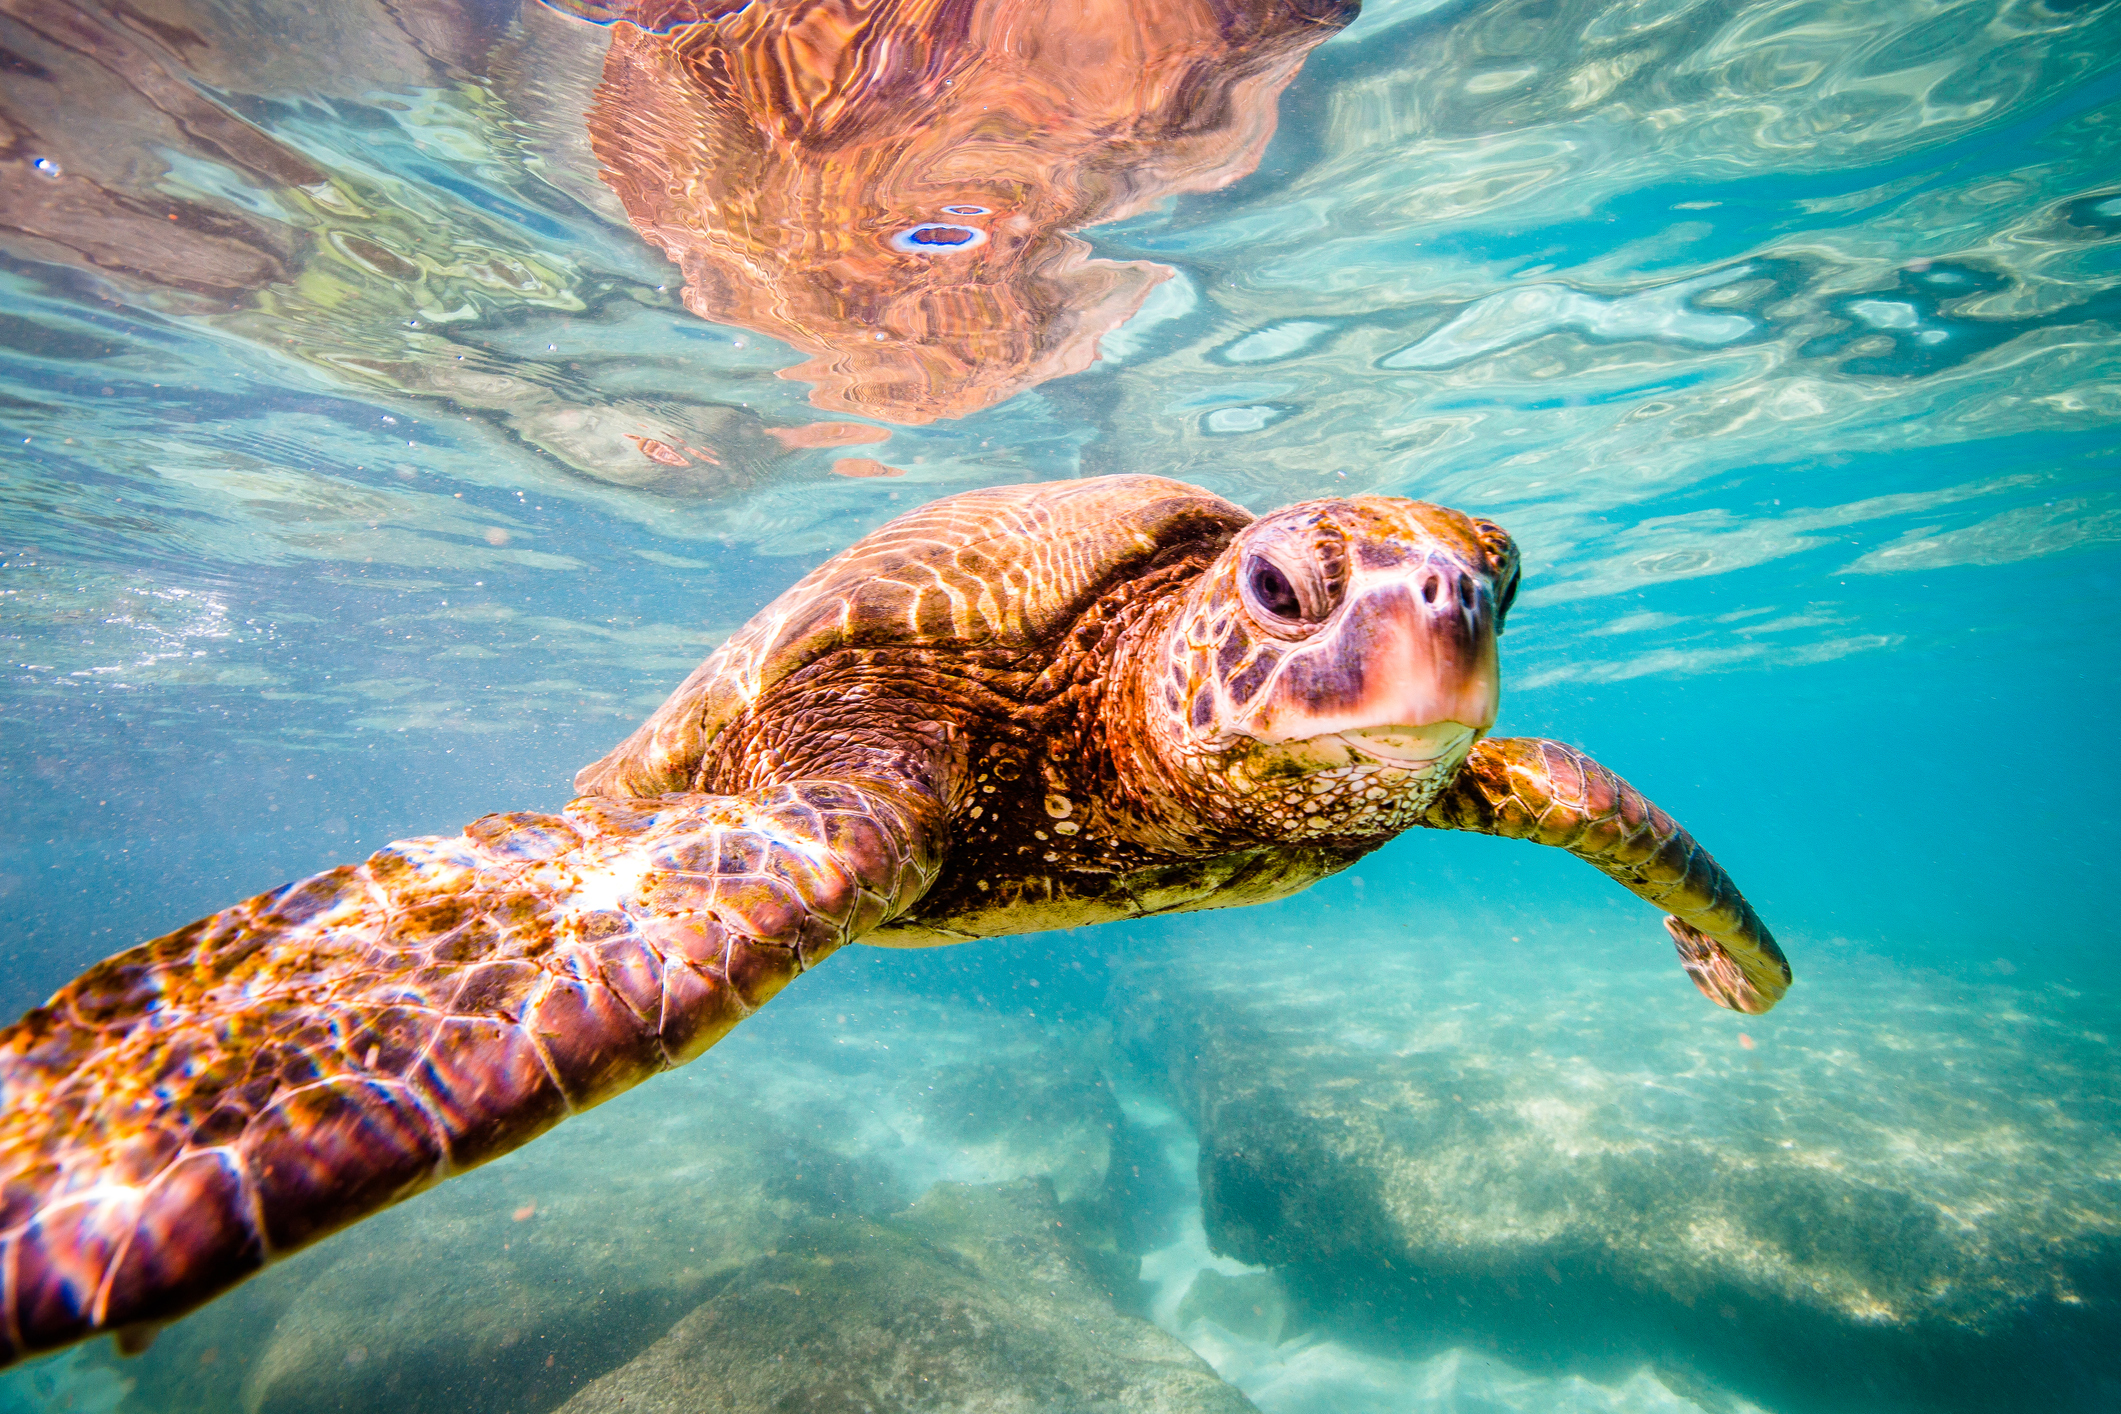 Agency Proposes Rule to Protect Sea Turtles | The ...